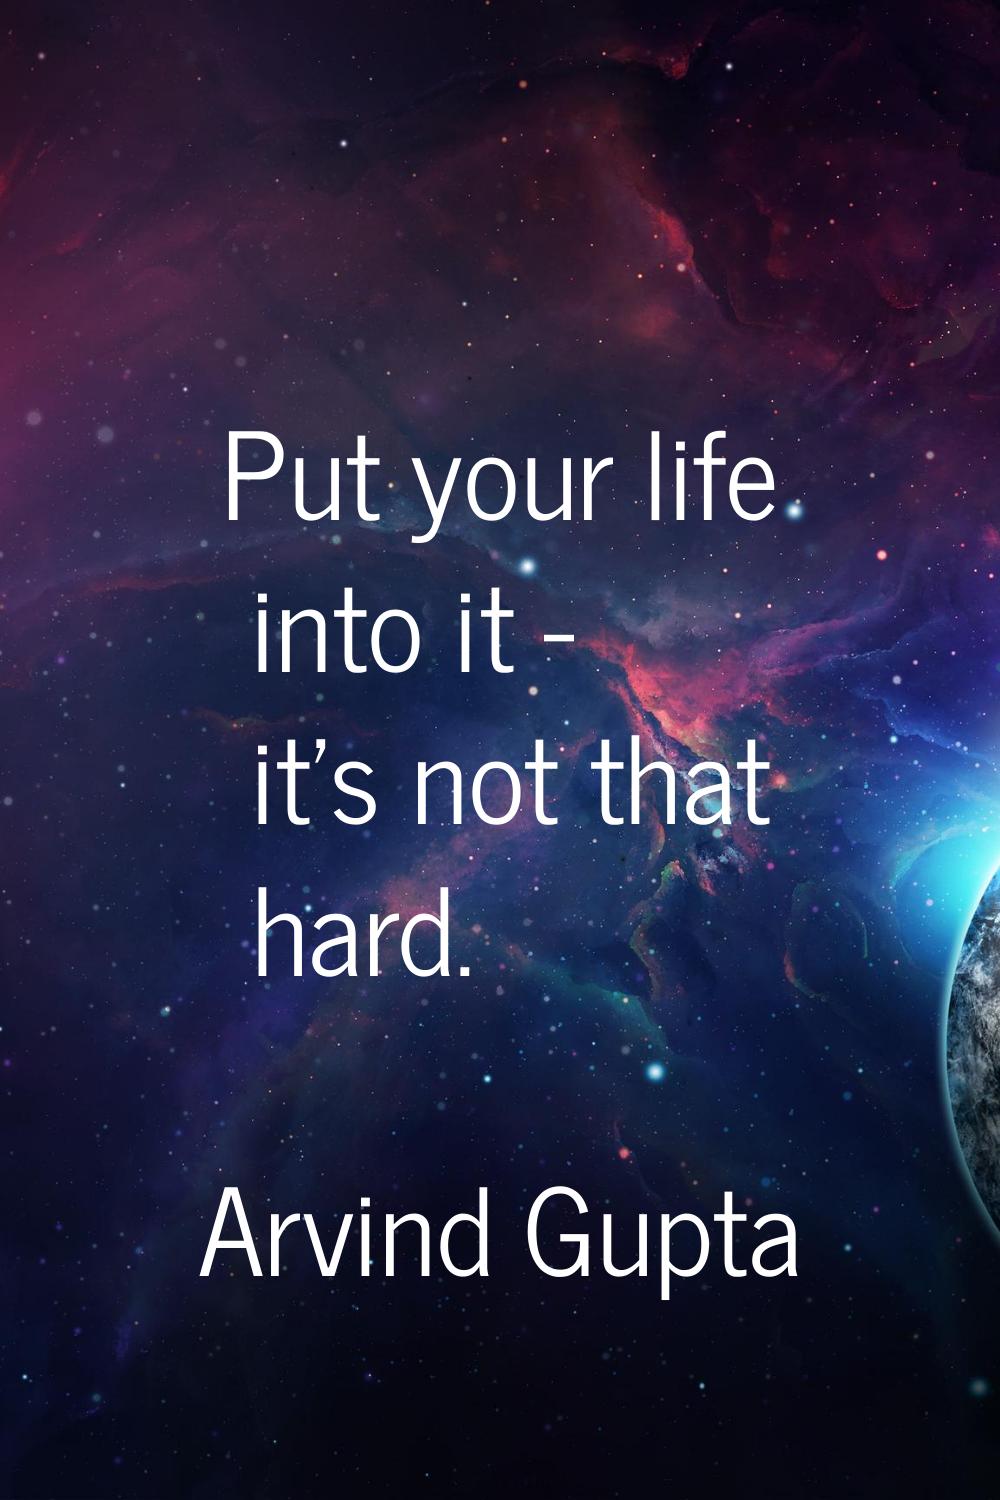 Put your life into it - it's not that hard.